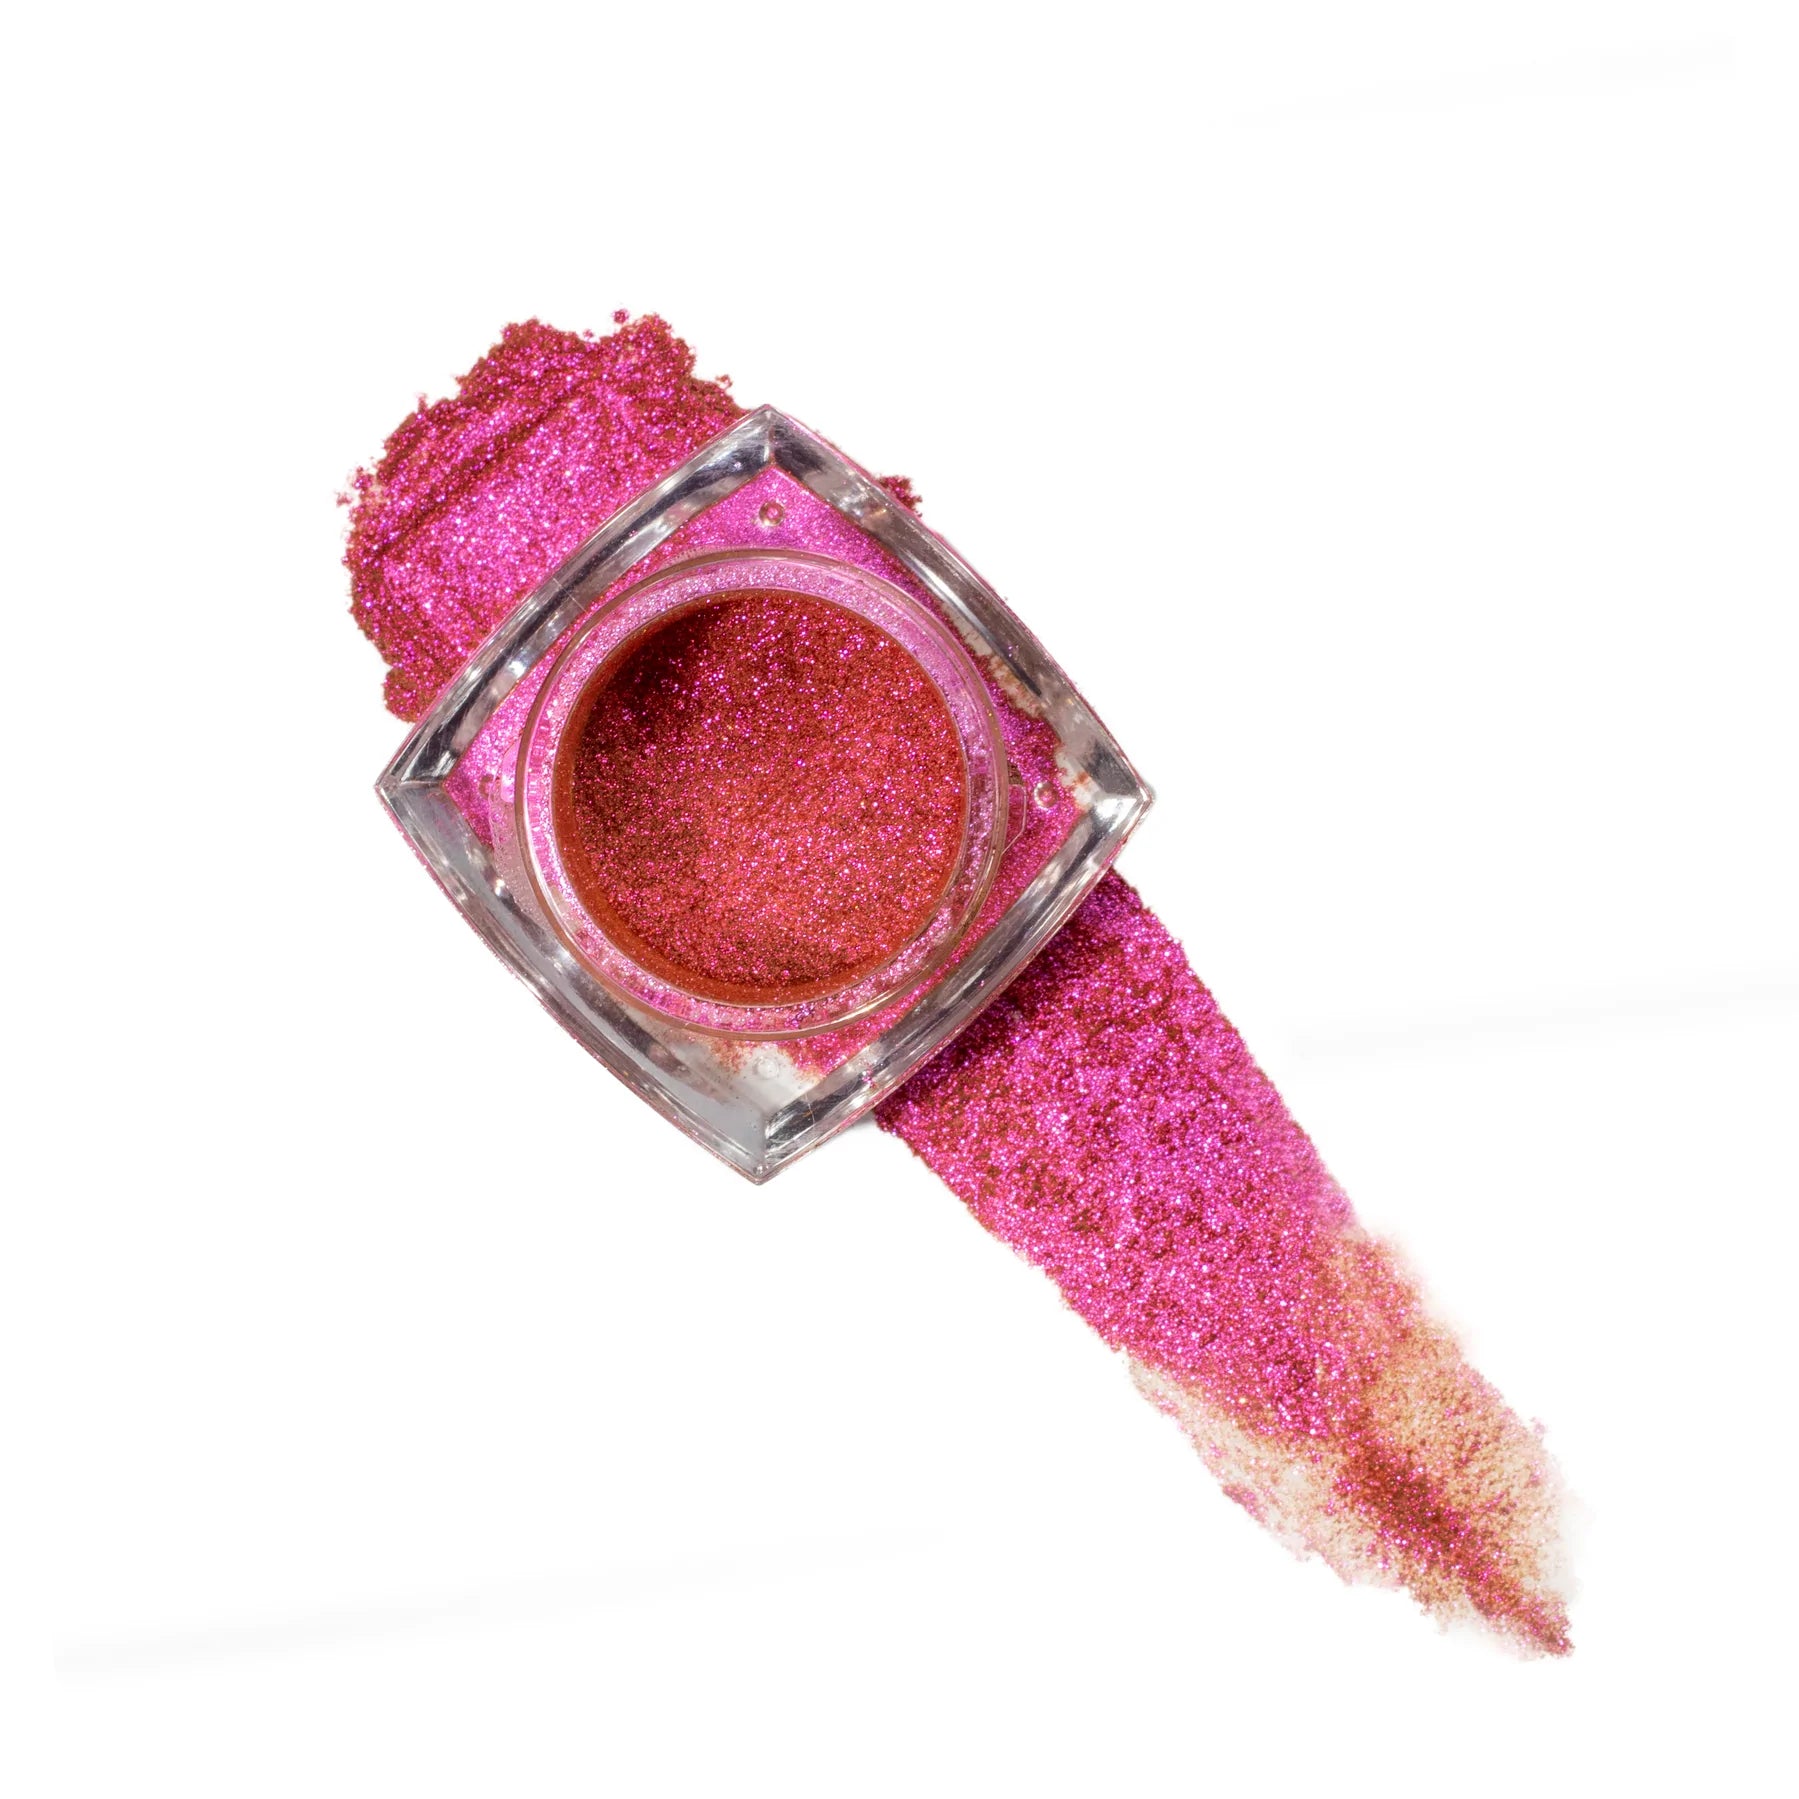 With Love Cosmetics - Loose Pigment Fame